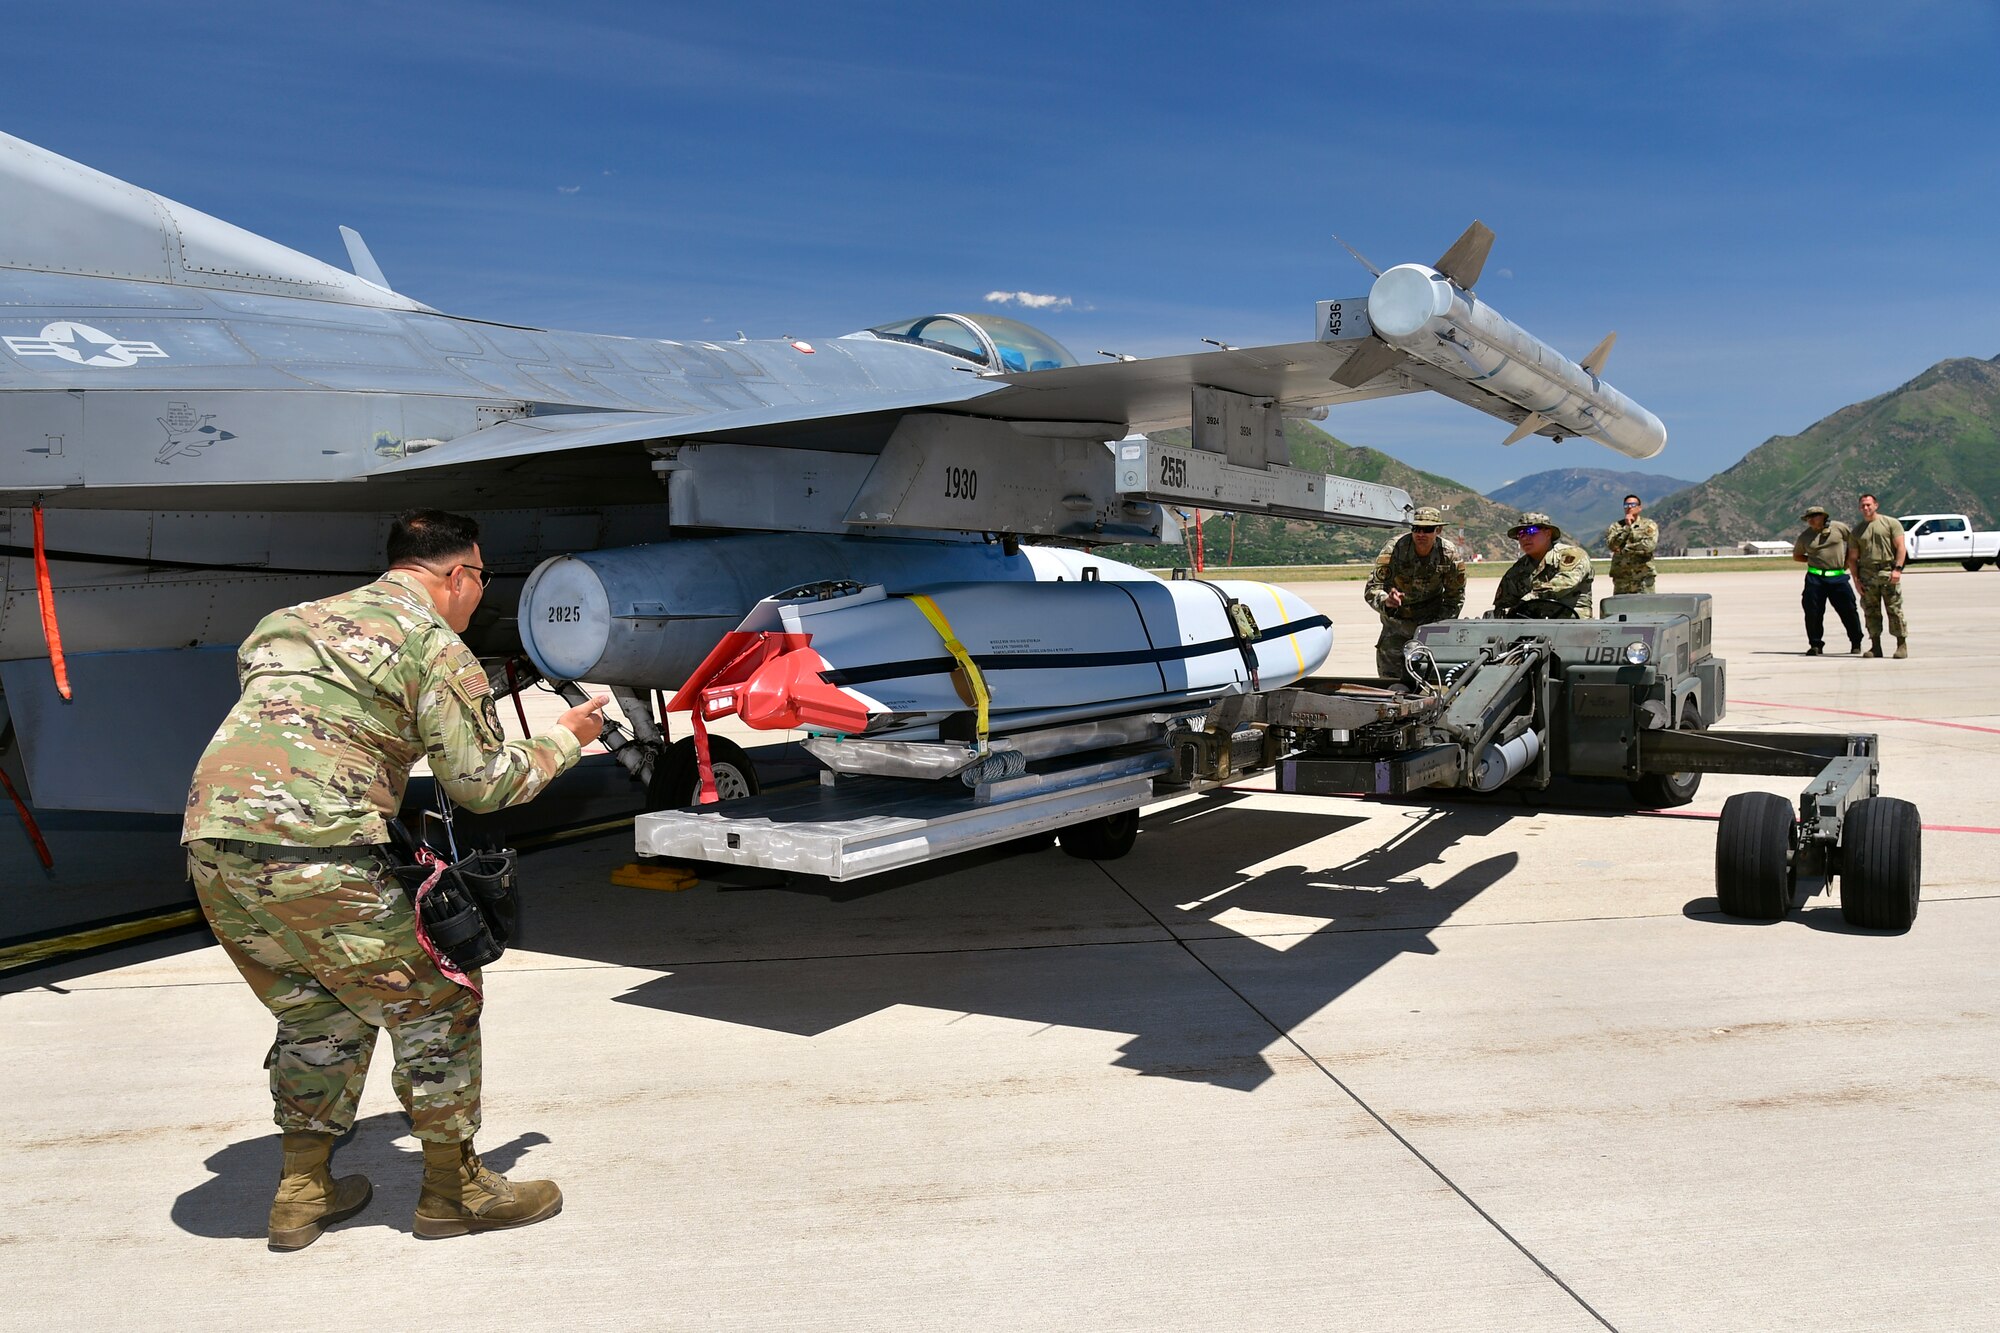 Airmen with the Air National Guard Air Force Reserve Command Test Center (AATC) load a Joint Air-to-Surface Standoff Missile (JASSM) on a pre-block F-16 for a test launch. This is the first time a JASSM has been launched from a pre-block F-16, a model flown by Air National Guard and Air Force Reserve units.